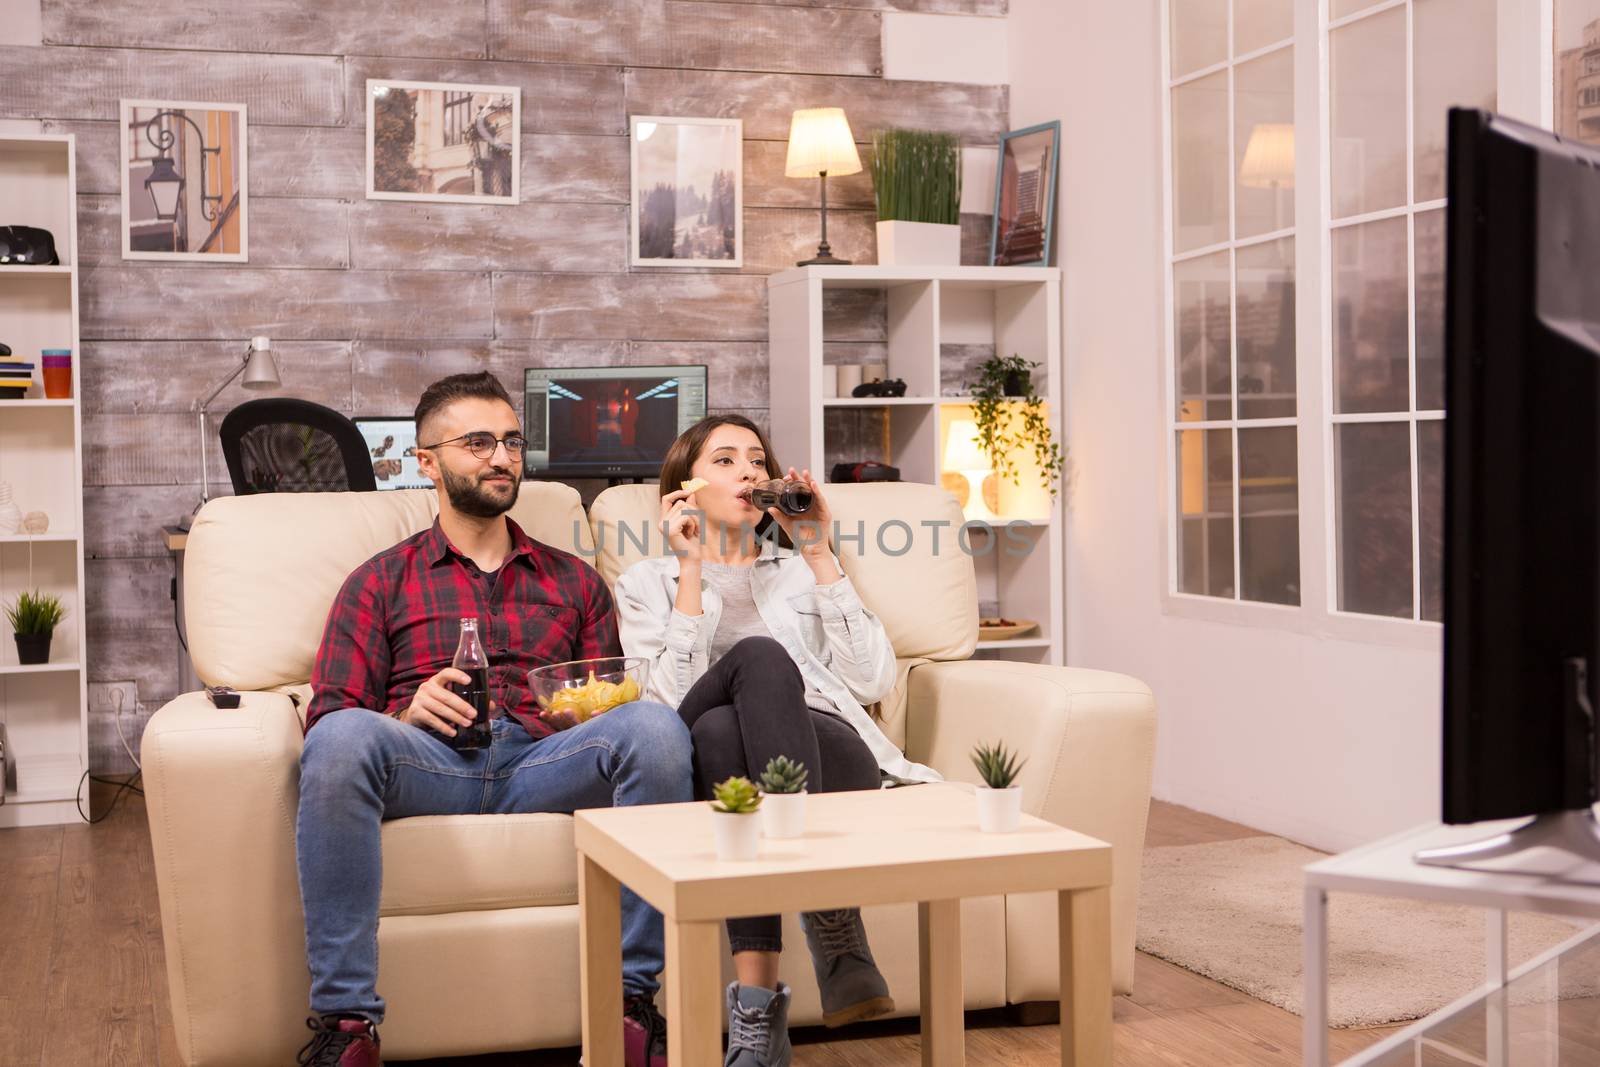 Cheerful young couple sitting on sofa and watching a movie on tv while eating chips and drinking soda.